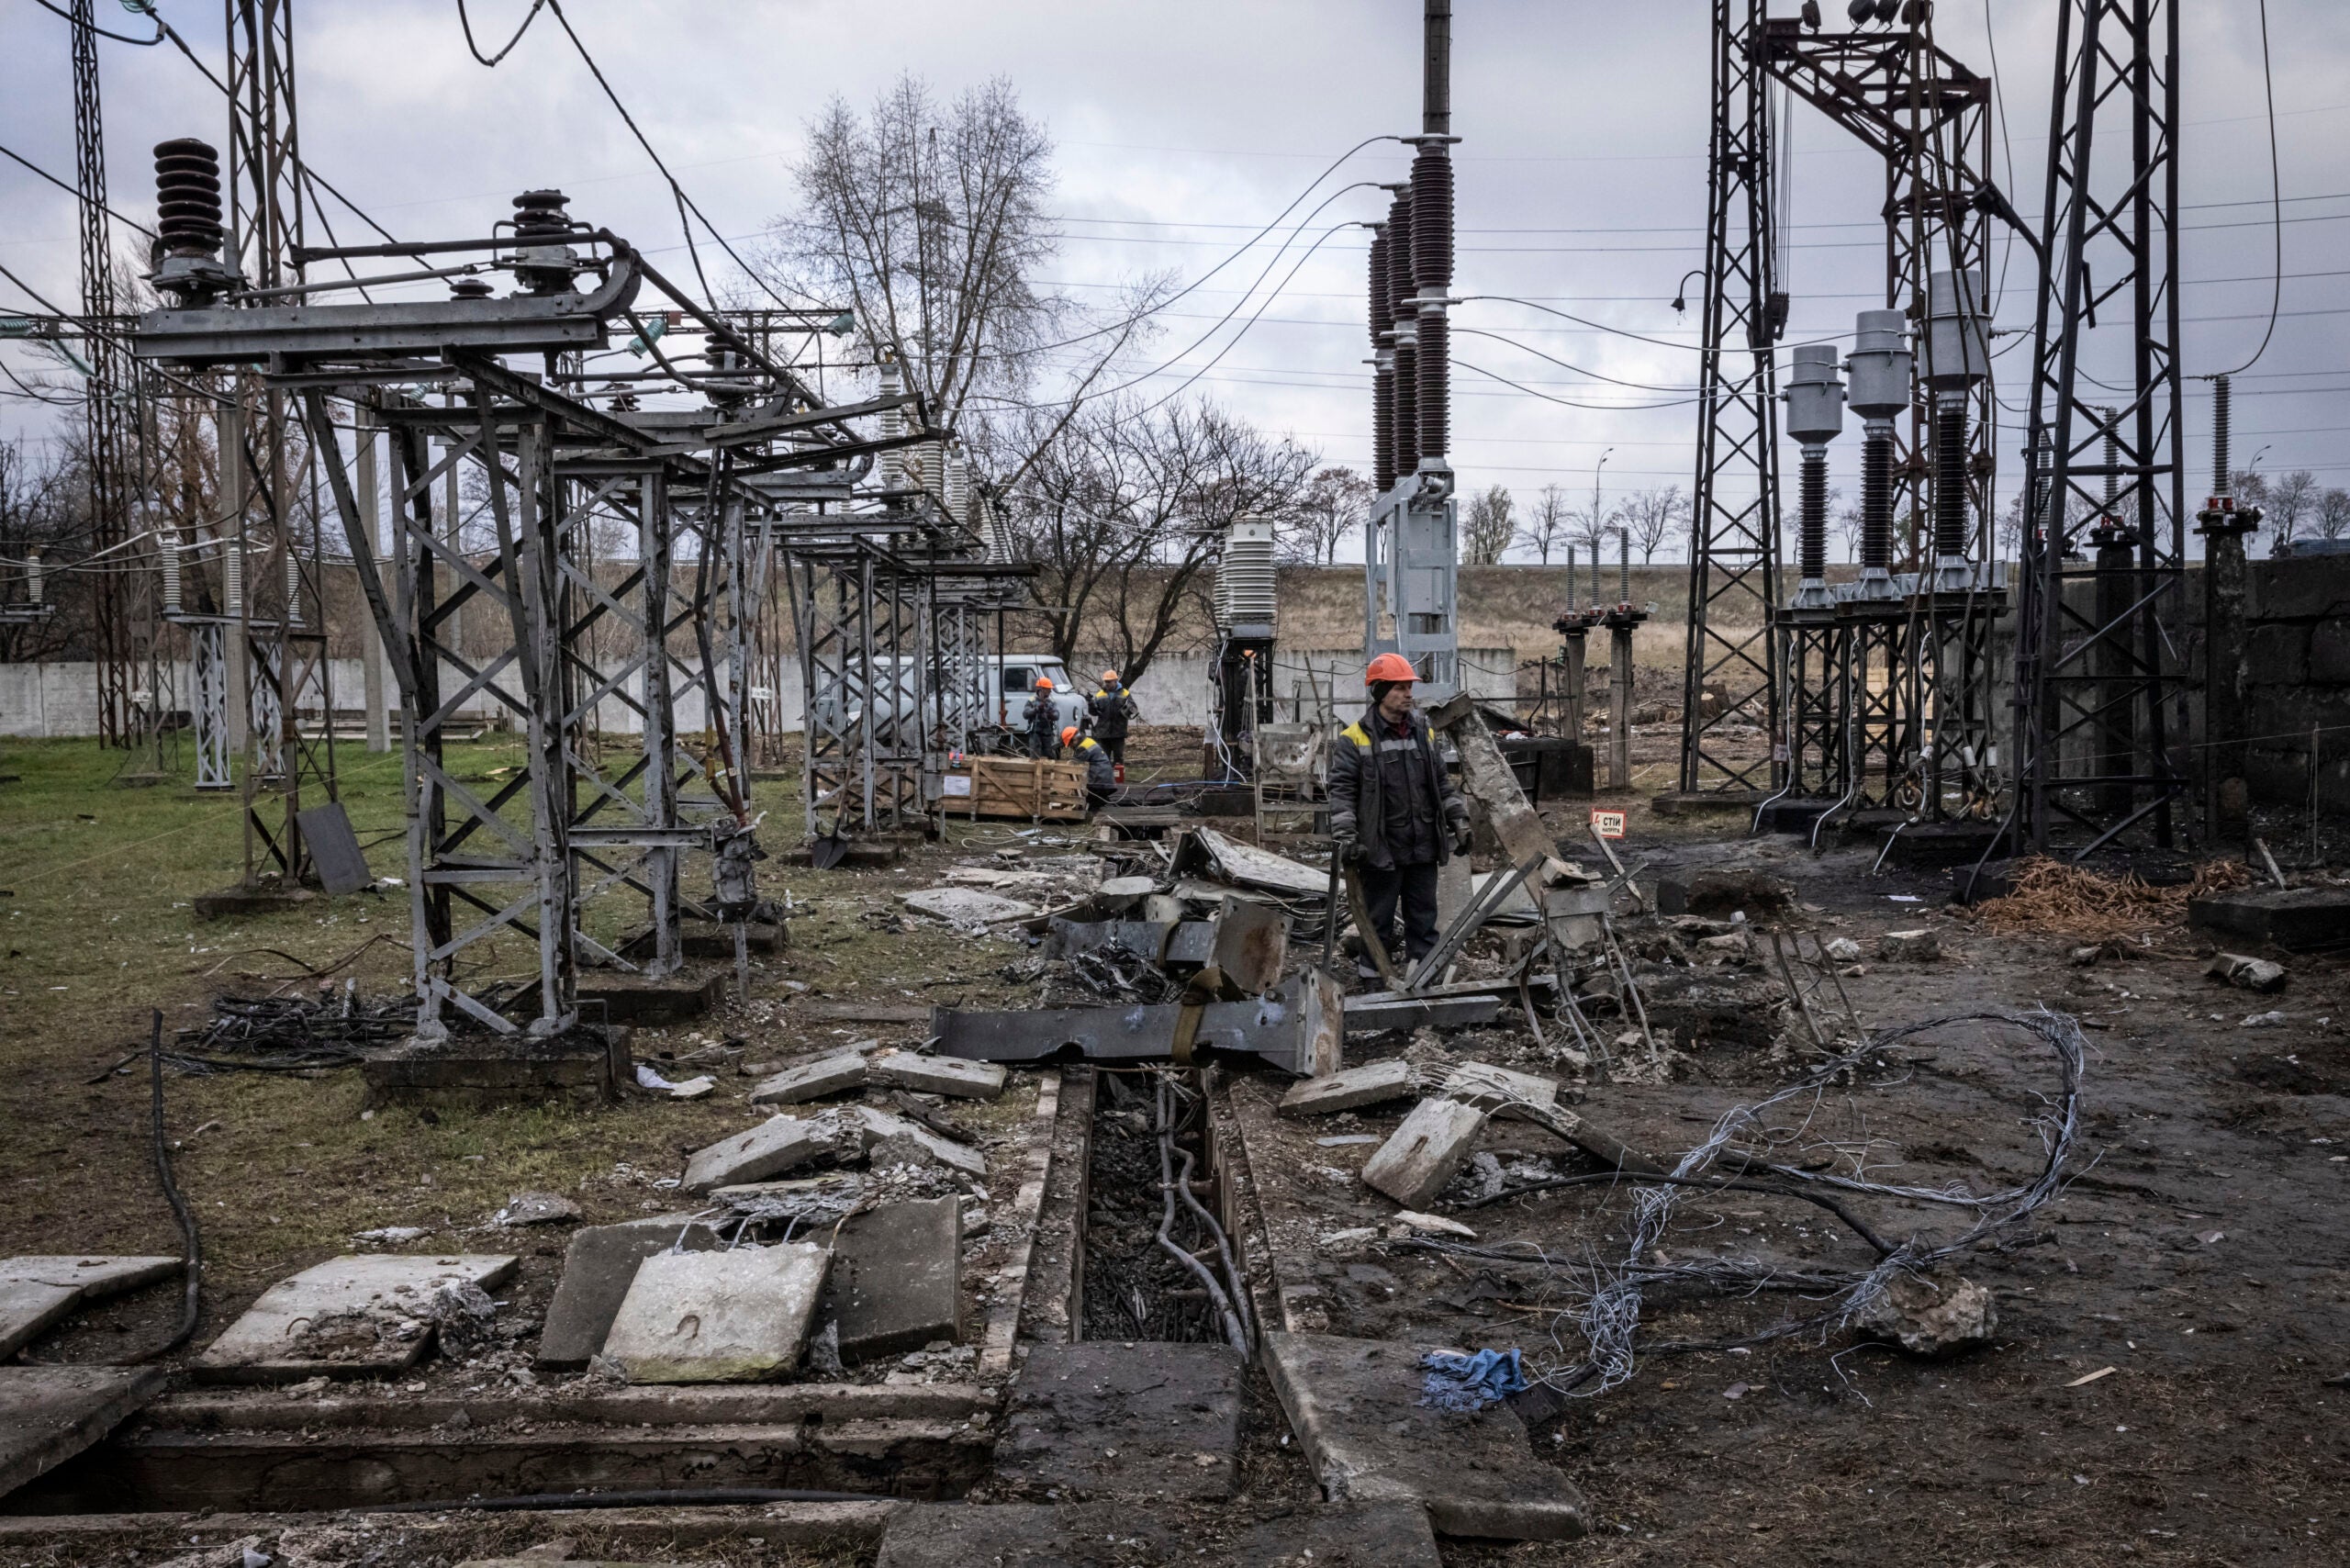 KYIV REGION, UKRAINE - NOVEMBER 04: Workers repair infrastructure in a power station that was damaged by a Russian air attack in October, on November 04, 2022 in Kyiv Oblast, Ukraine. Electricity and heating outages across Ukraine caused by missile and drone strikes to energy infrastructure have added urgency preparations for winter. (Photo by Ed Ram/Getty Images)